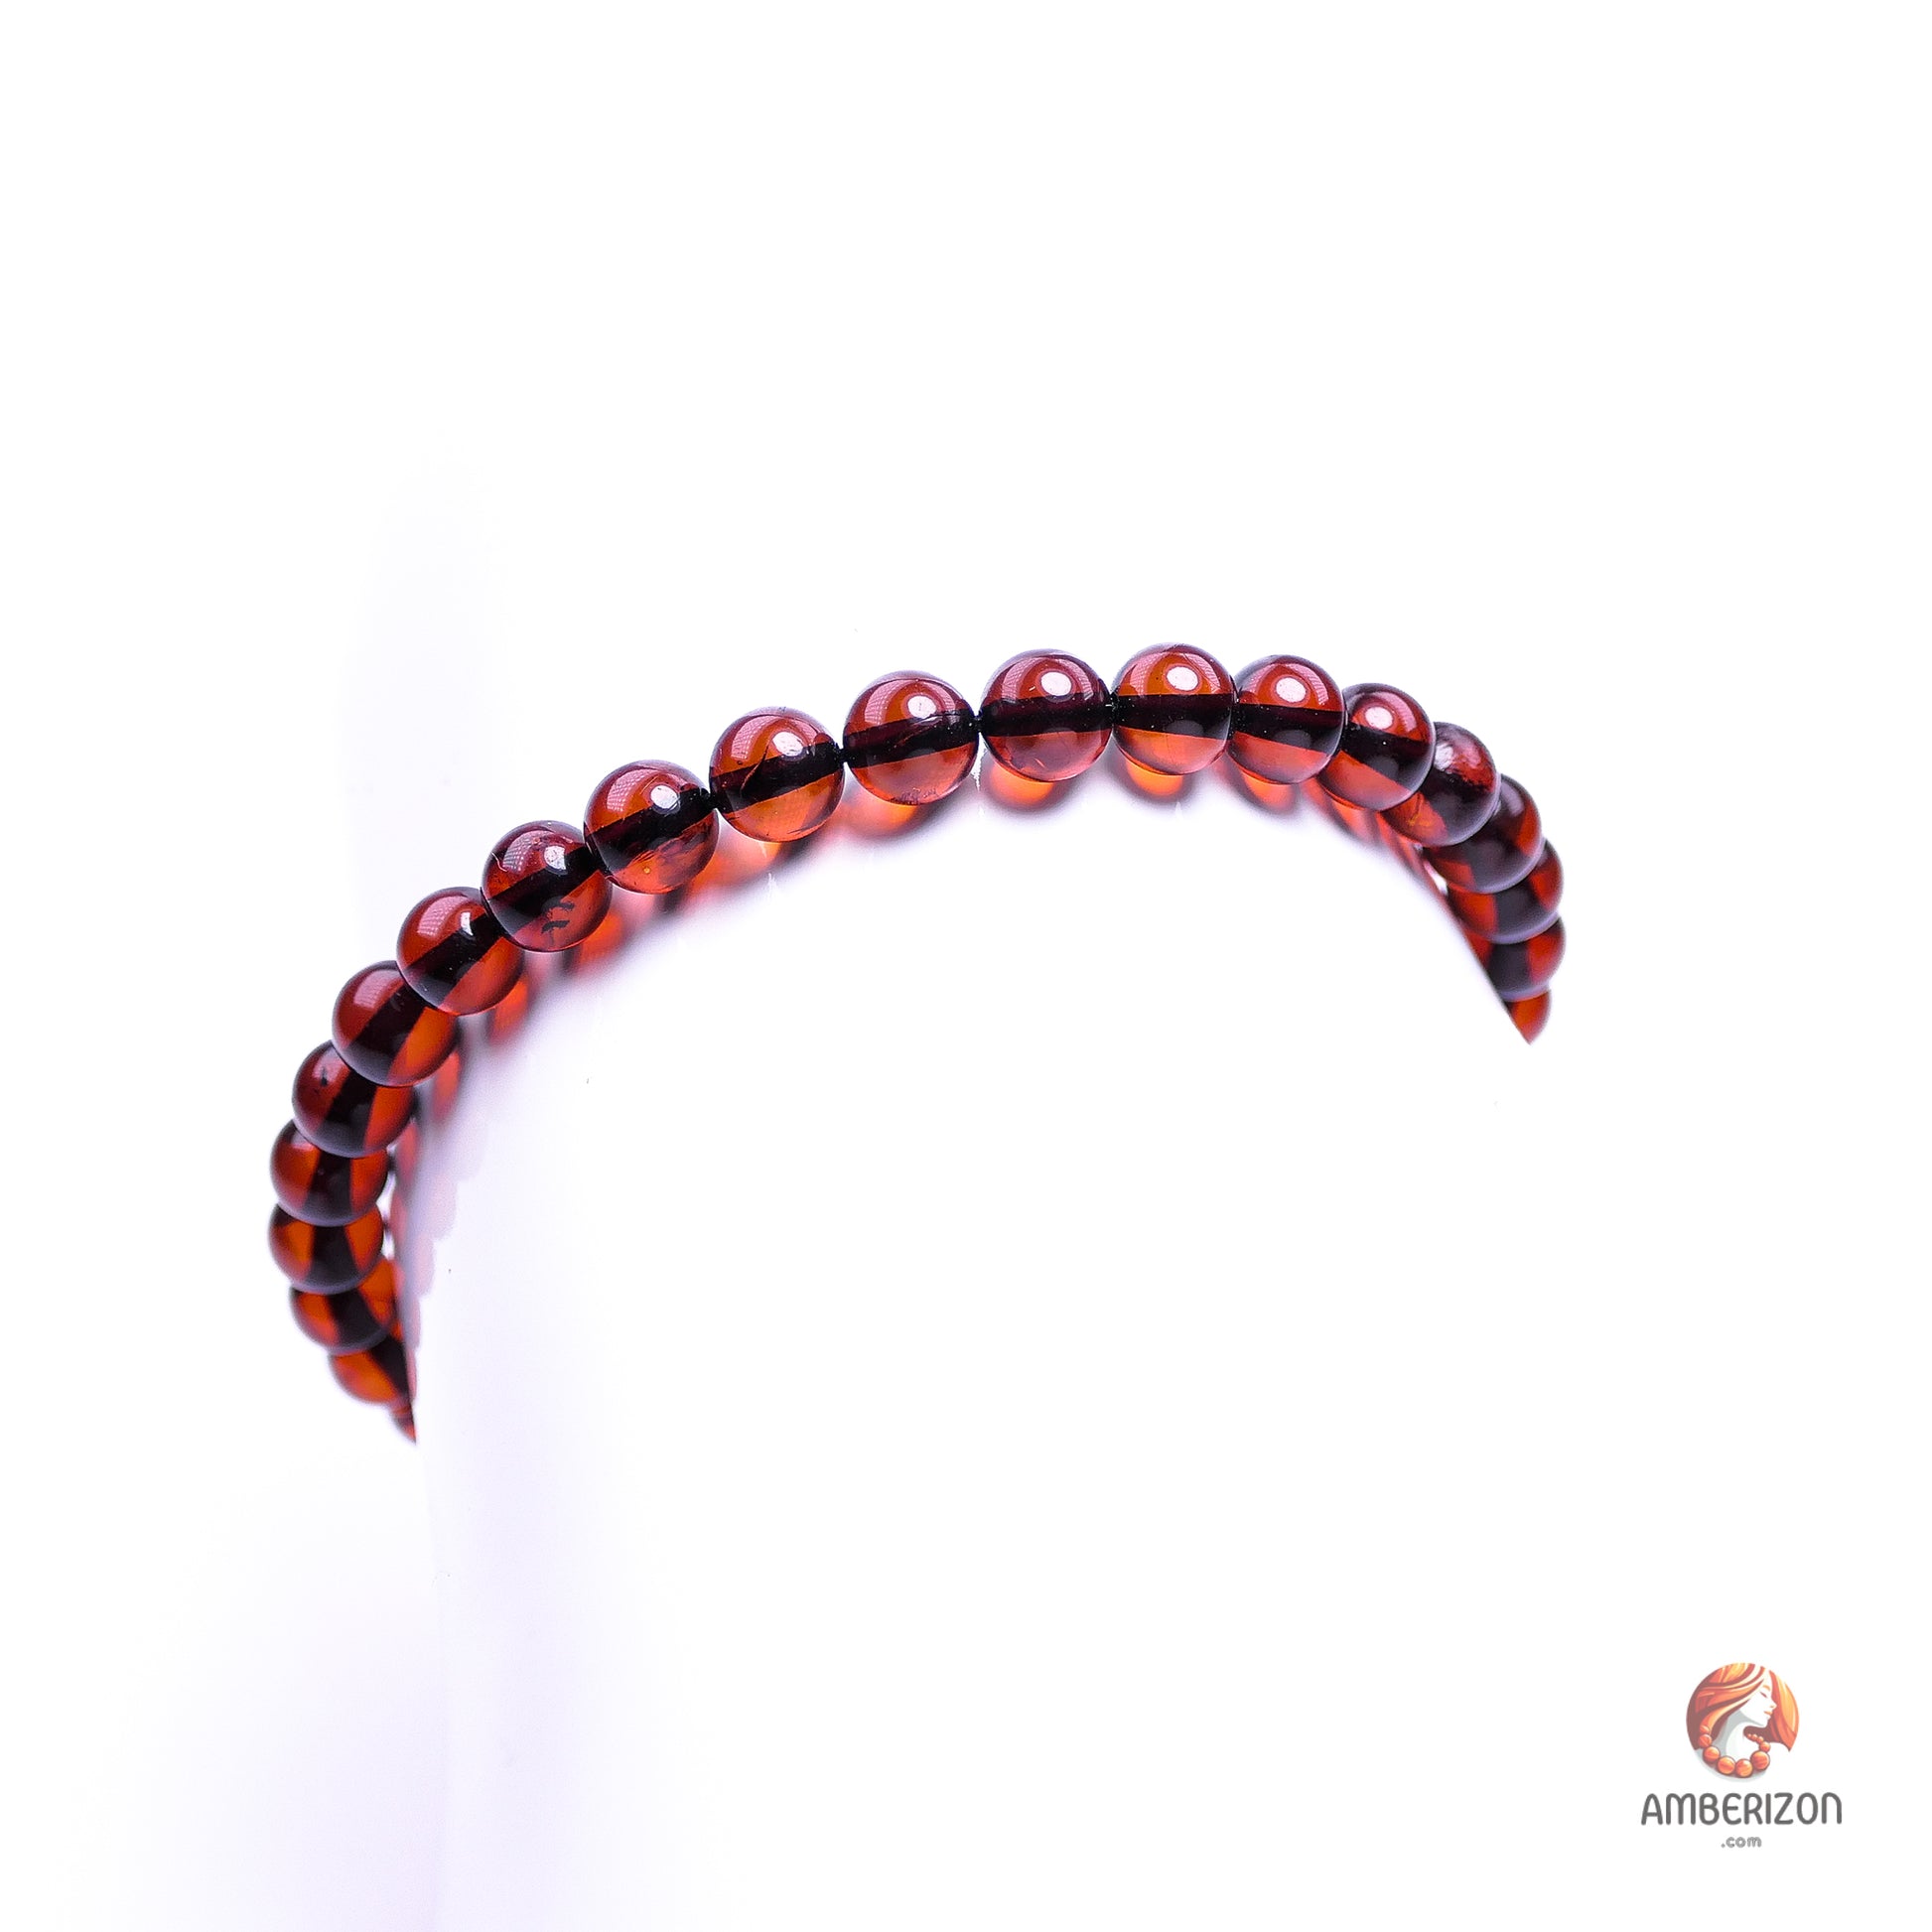 Polished cherry amber ball bracelet - Premium AAA quality round beads - Stretchy